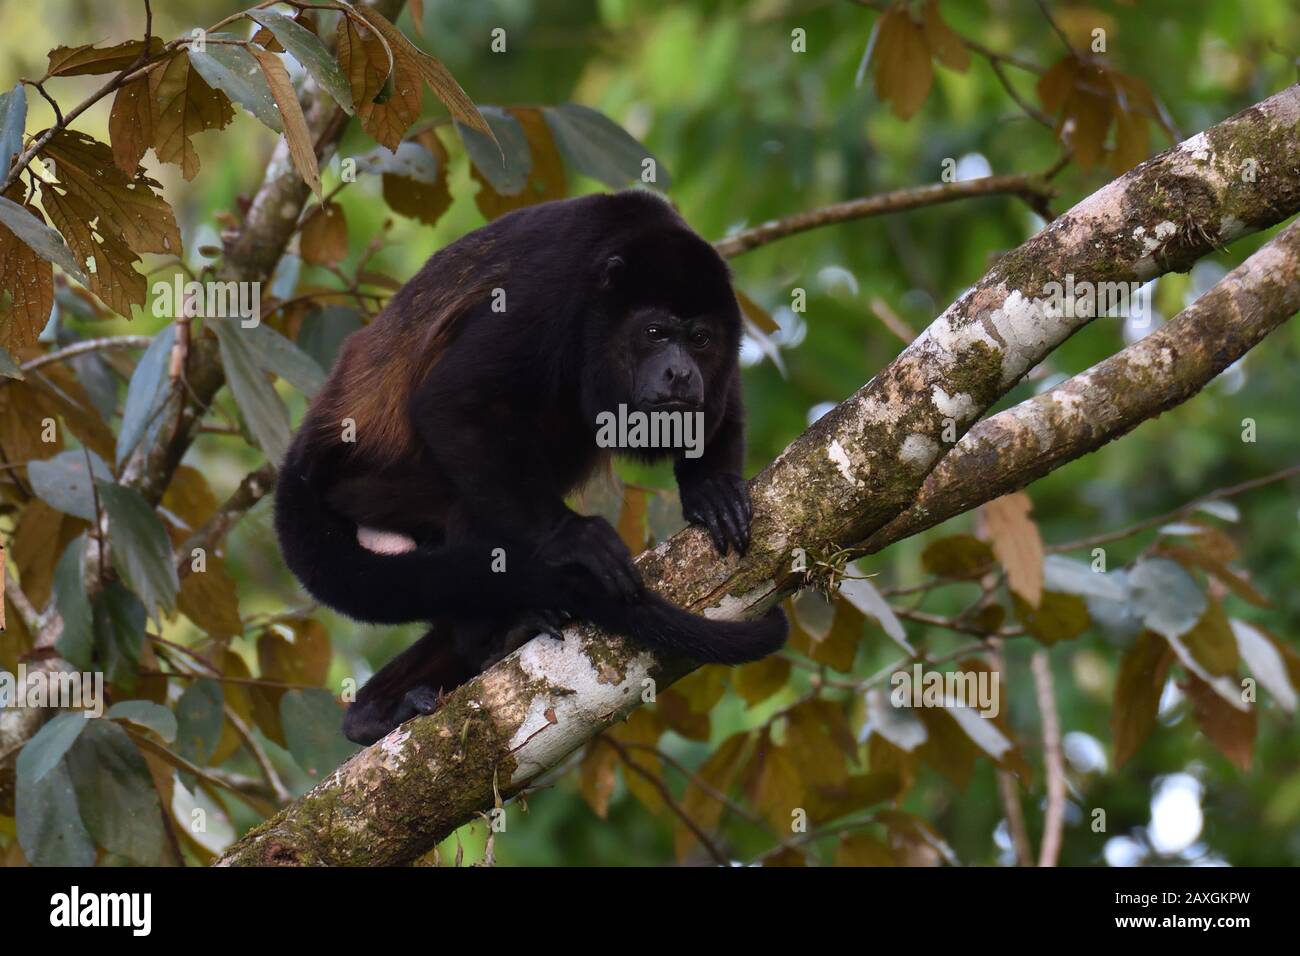 A Mantled Howler Monkey in Costa Rica rainforest Stock Photo